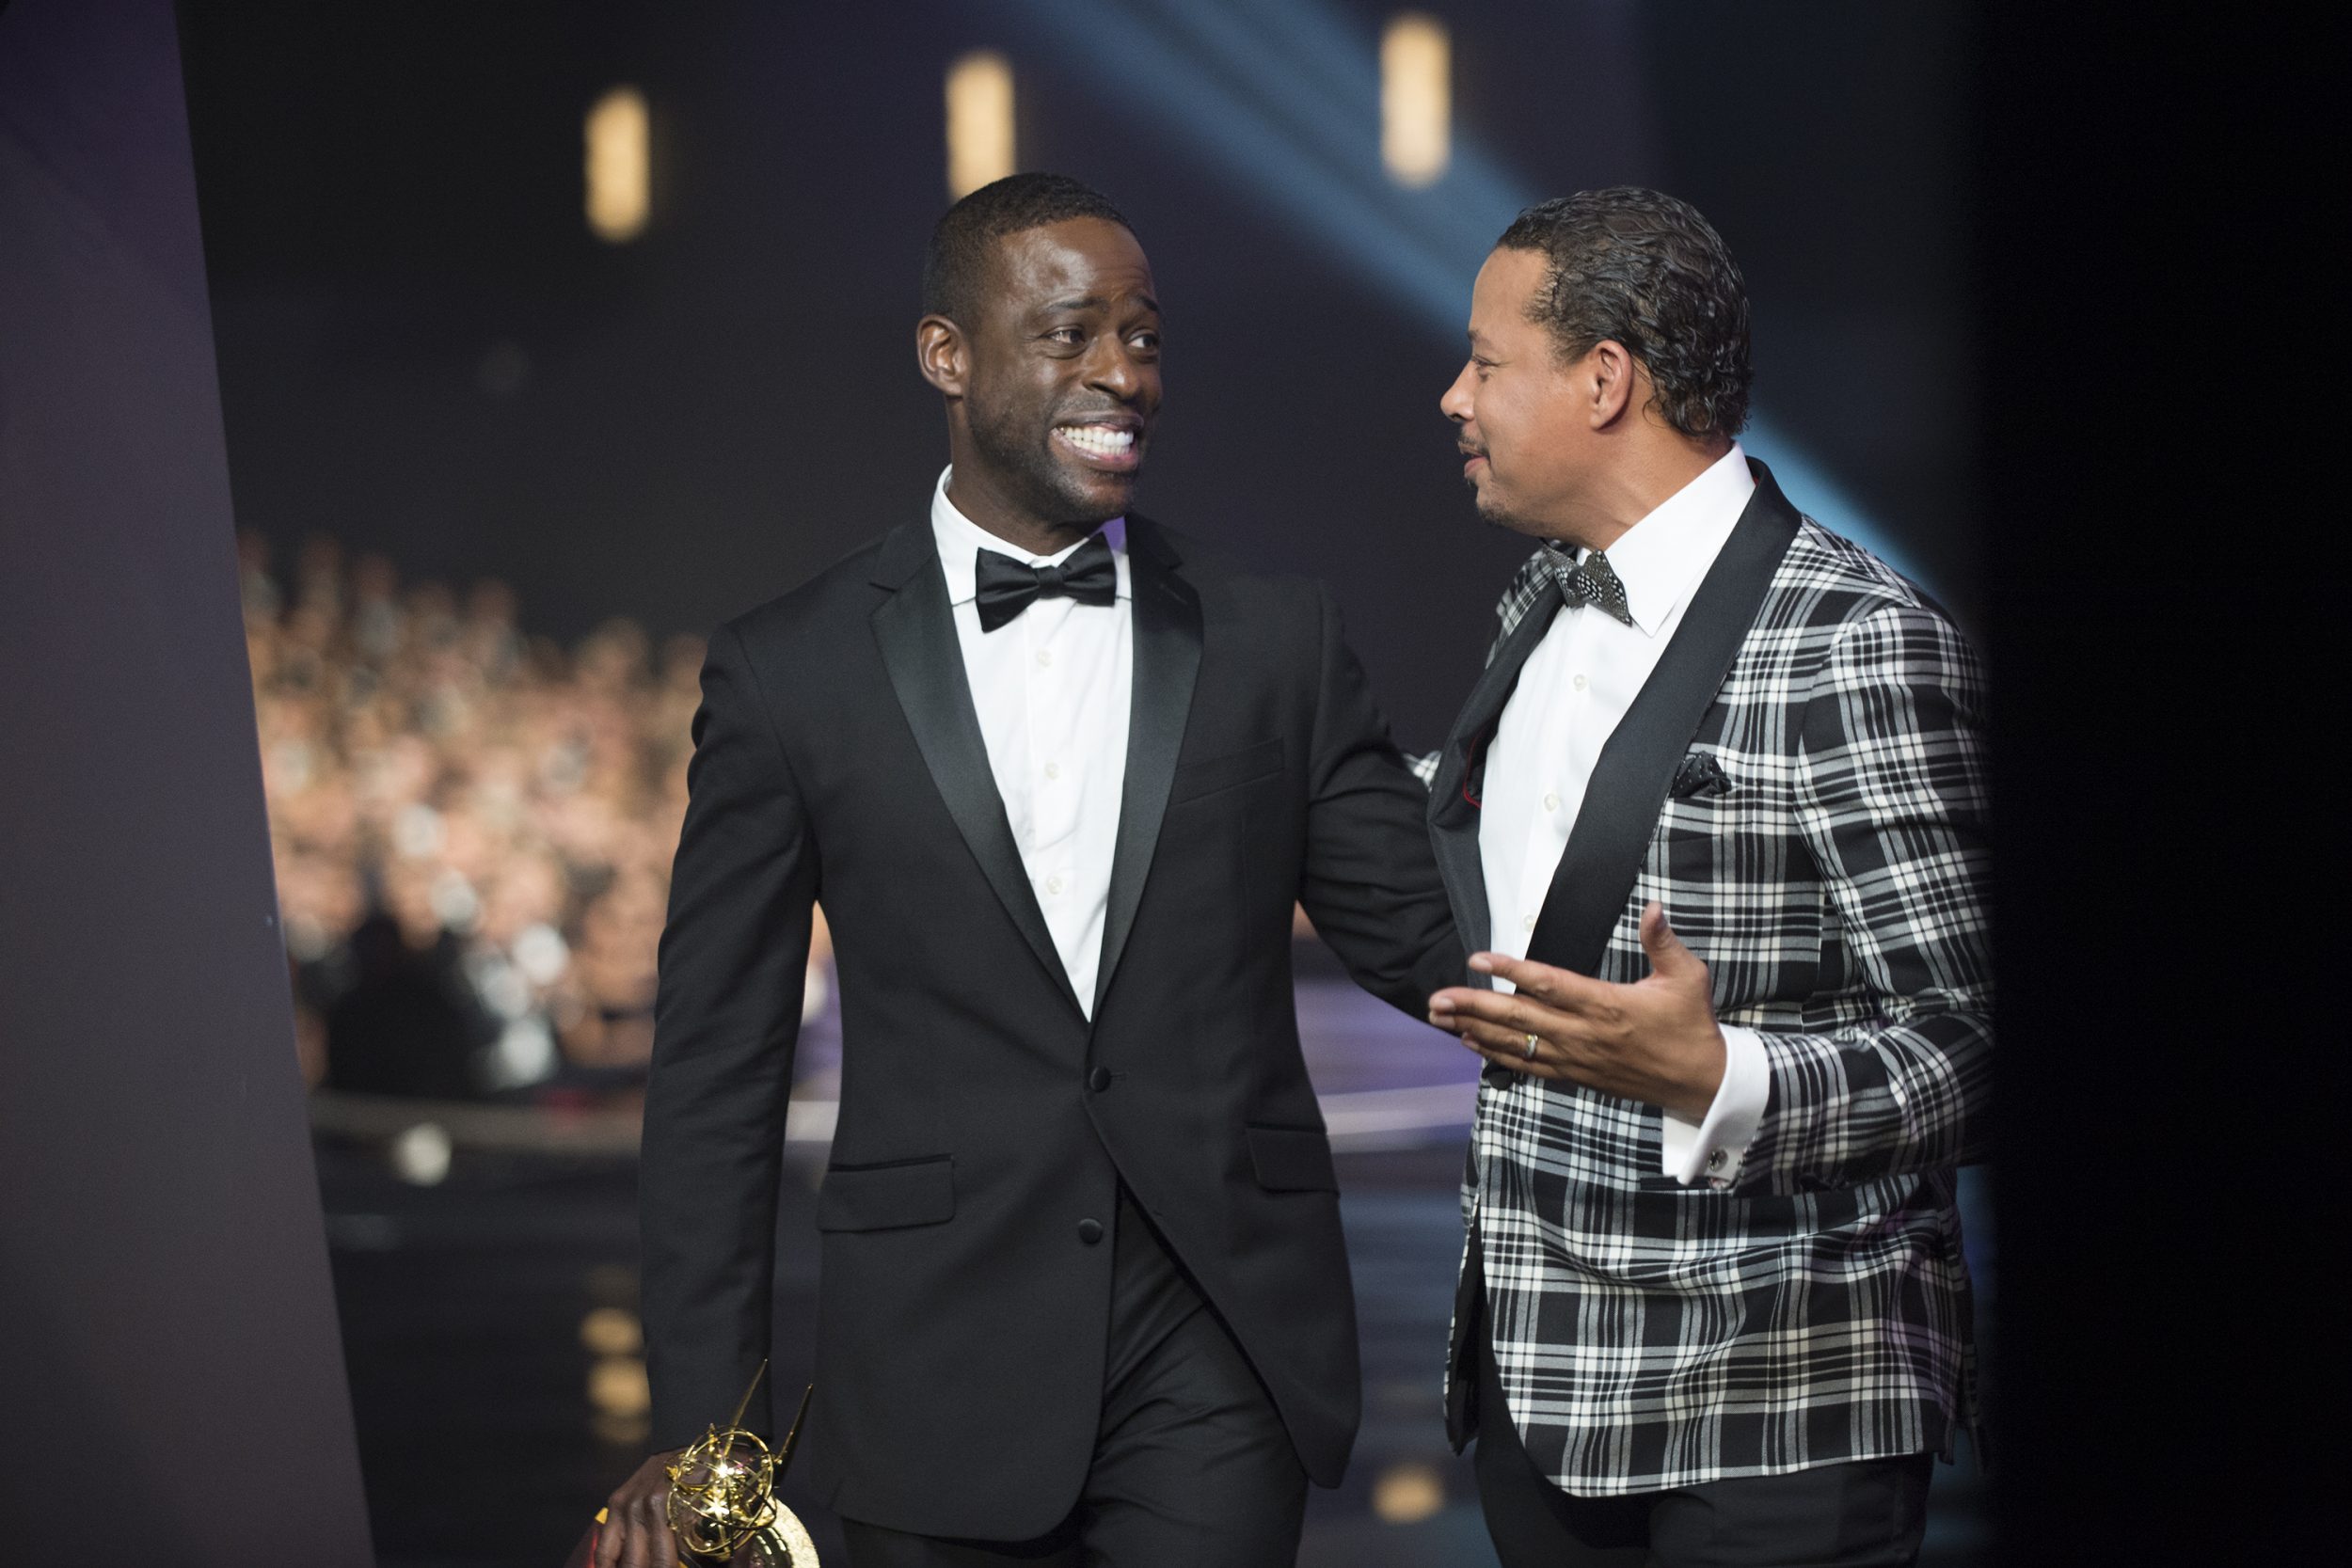 THE 68TH EMMY(r) AWARDS - “The 68th Emmy Awards” broadcasts live from The Microsoft Theater in Los Angeles, Sunday, September 18 (7:00-11:00 p.m. EDT/4:00-8:00 p.m. PDT), on ABC and is hosted by Jimmy Kimmel. (ABC/Image Group LA) STERLING K. BROWN, TERRANCE HOWARD